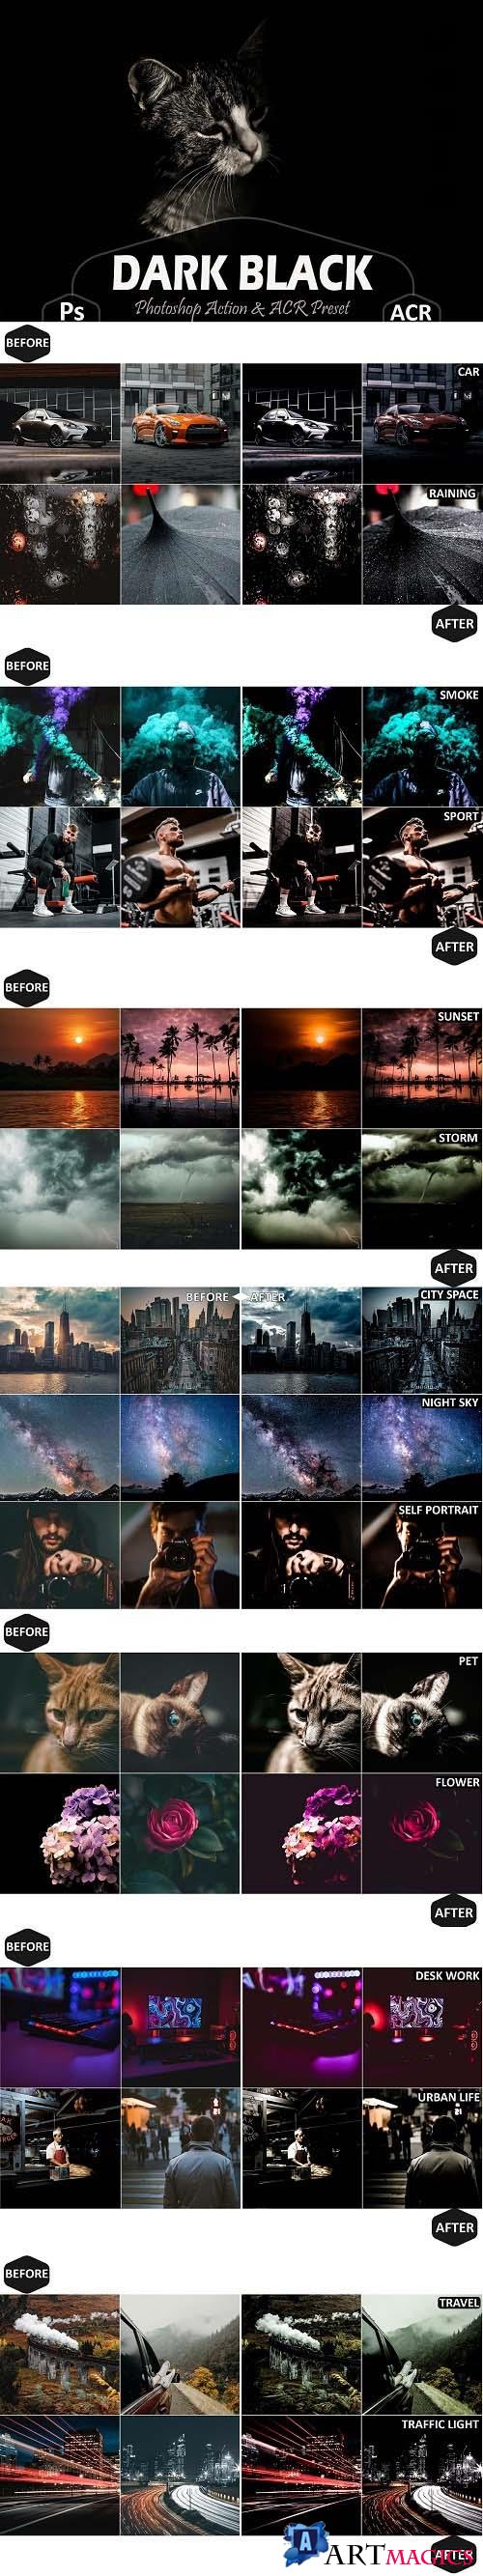 36 Dark Black Photoshop Actions And ACR Presets - 1553543